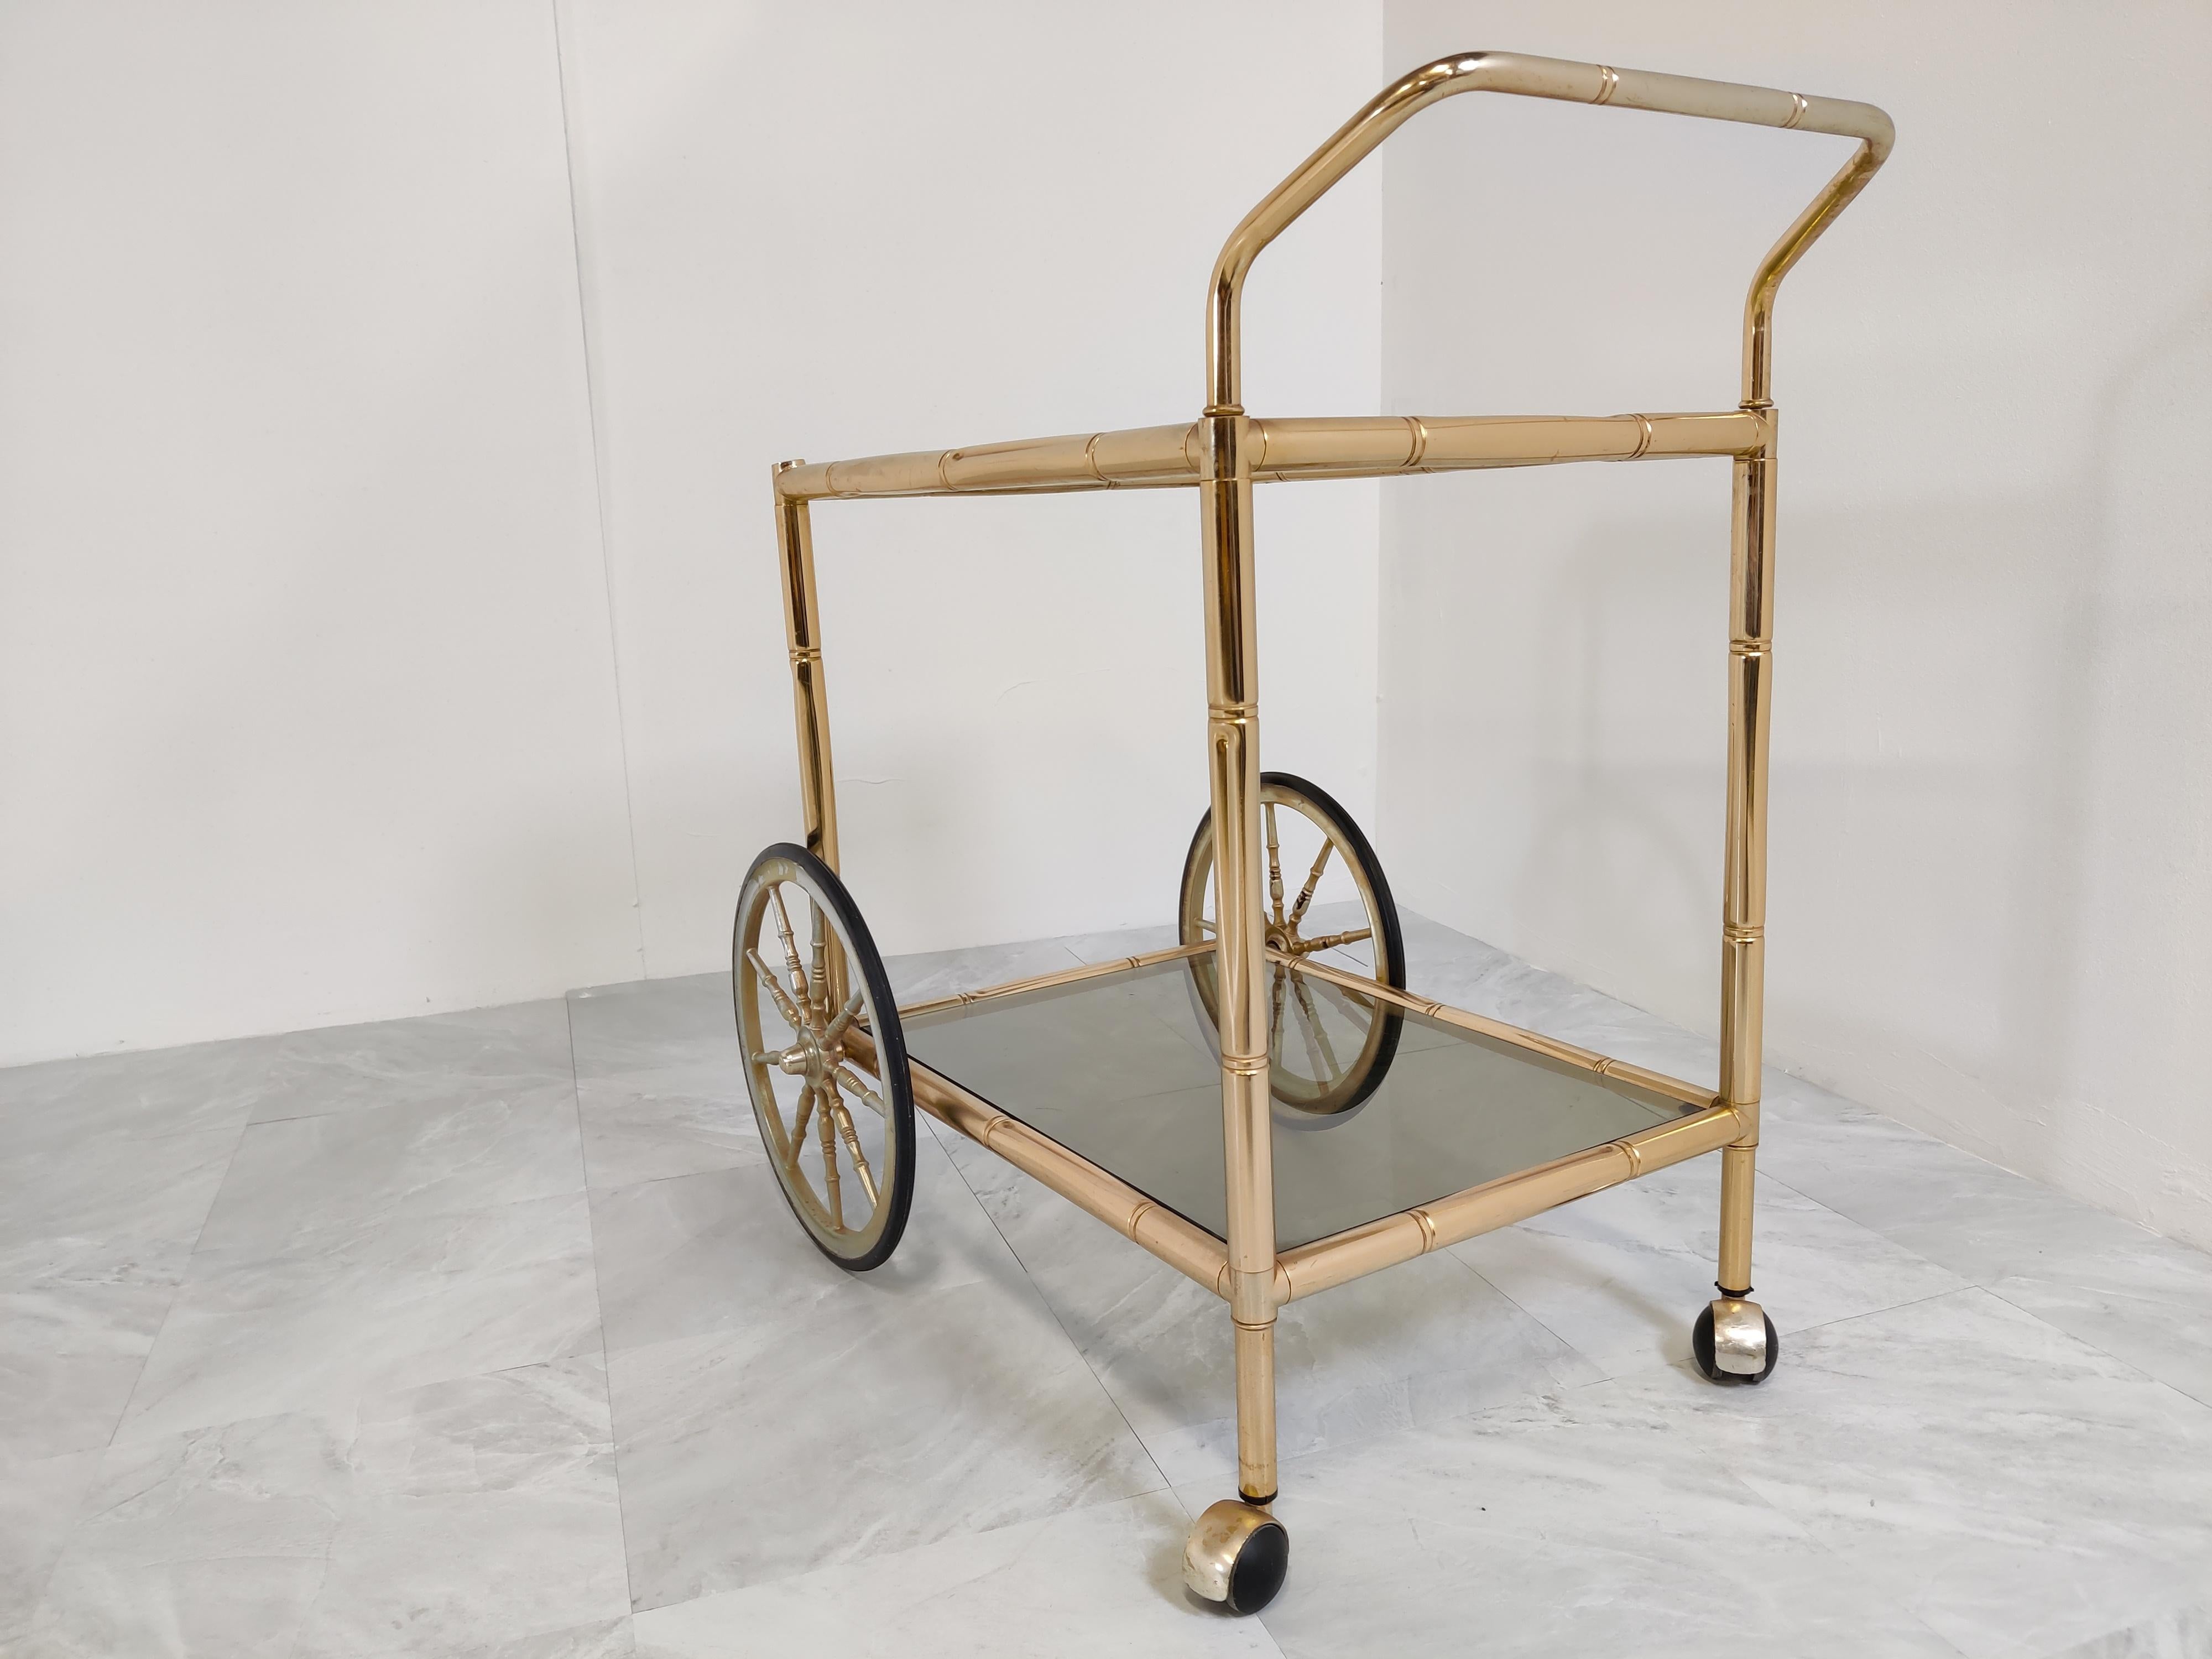 Elegant mid century faux bamboo brass serving trolley with smoked glass.

1970s- France

Good condition with normal age related wear

Dimensions:

Height: 75cm/29.52